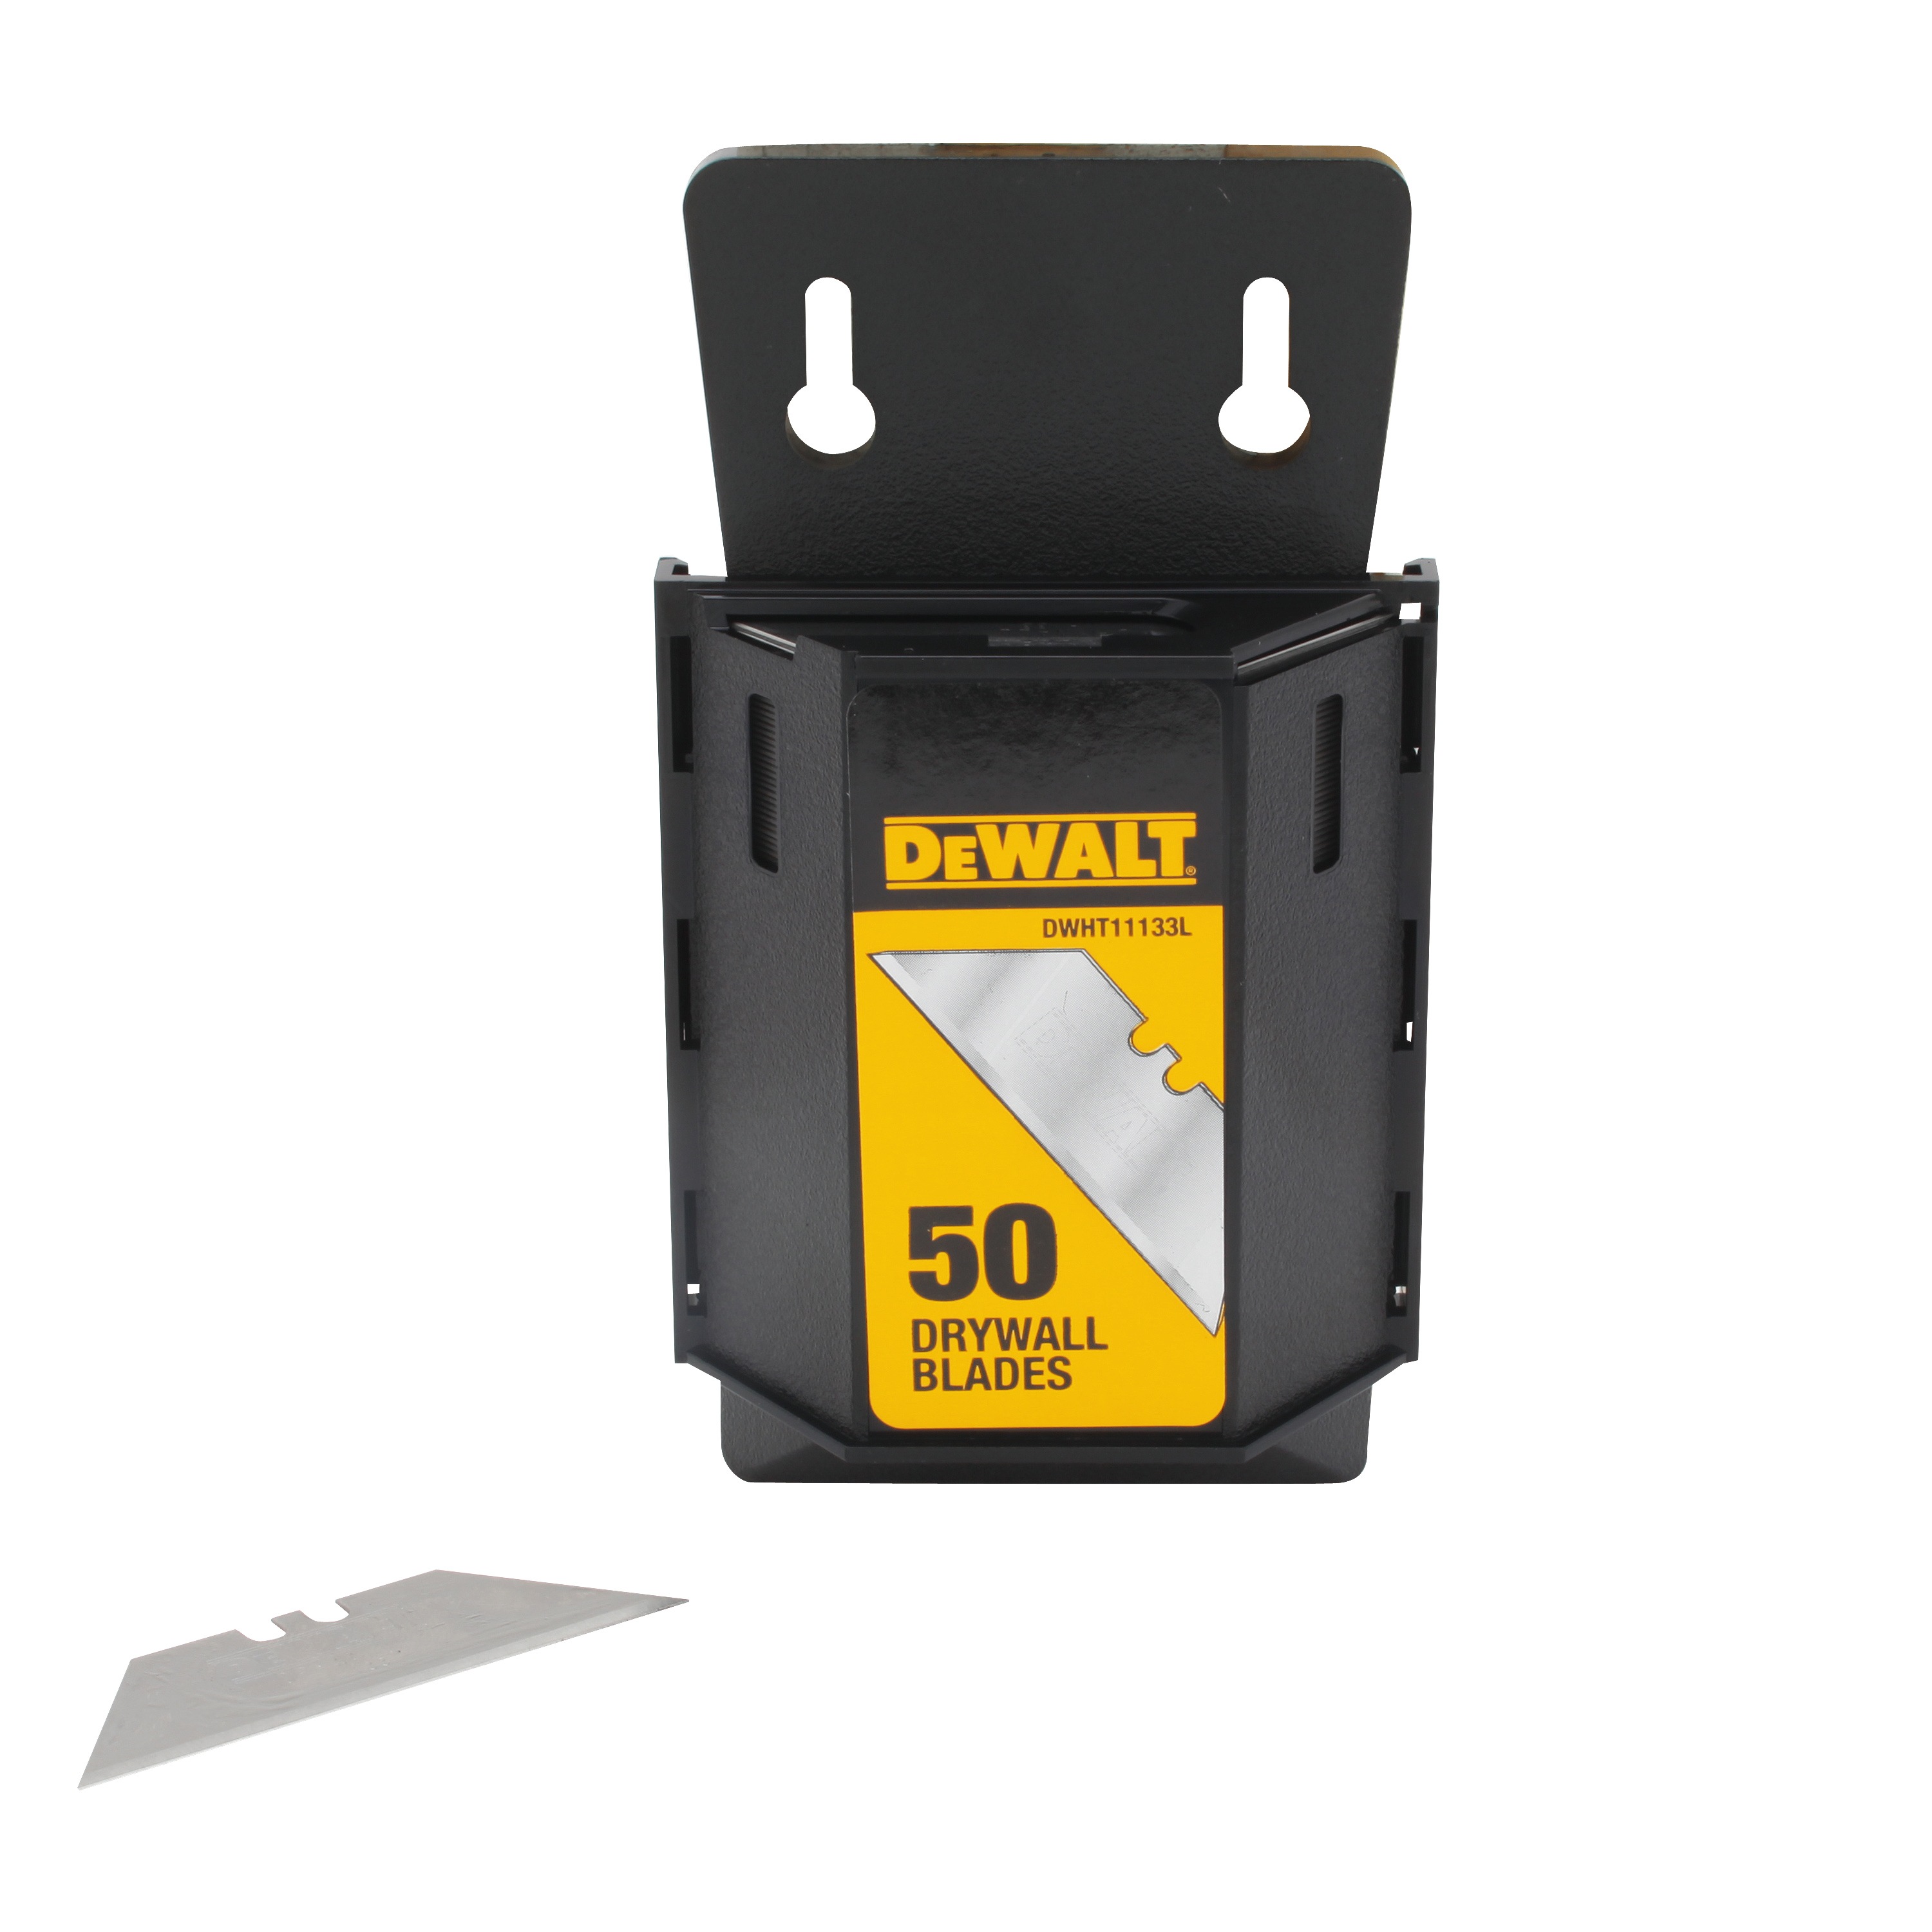 Profile of Drywall Blades 50 Pack along with single Drywall Blade.